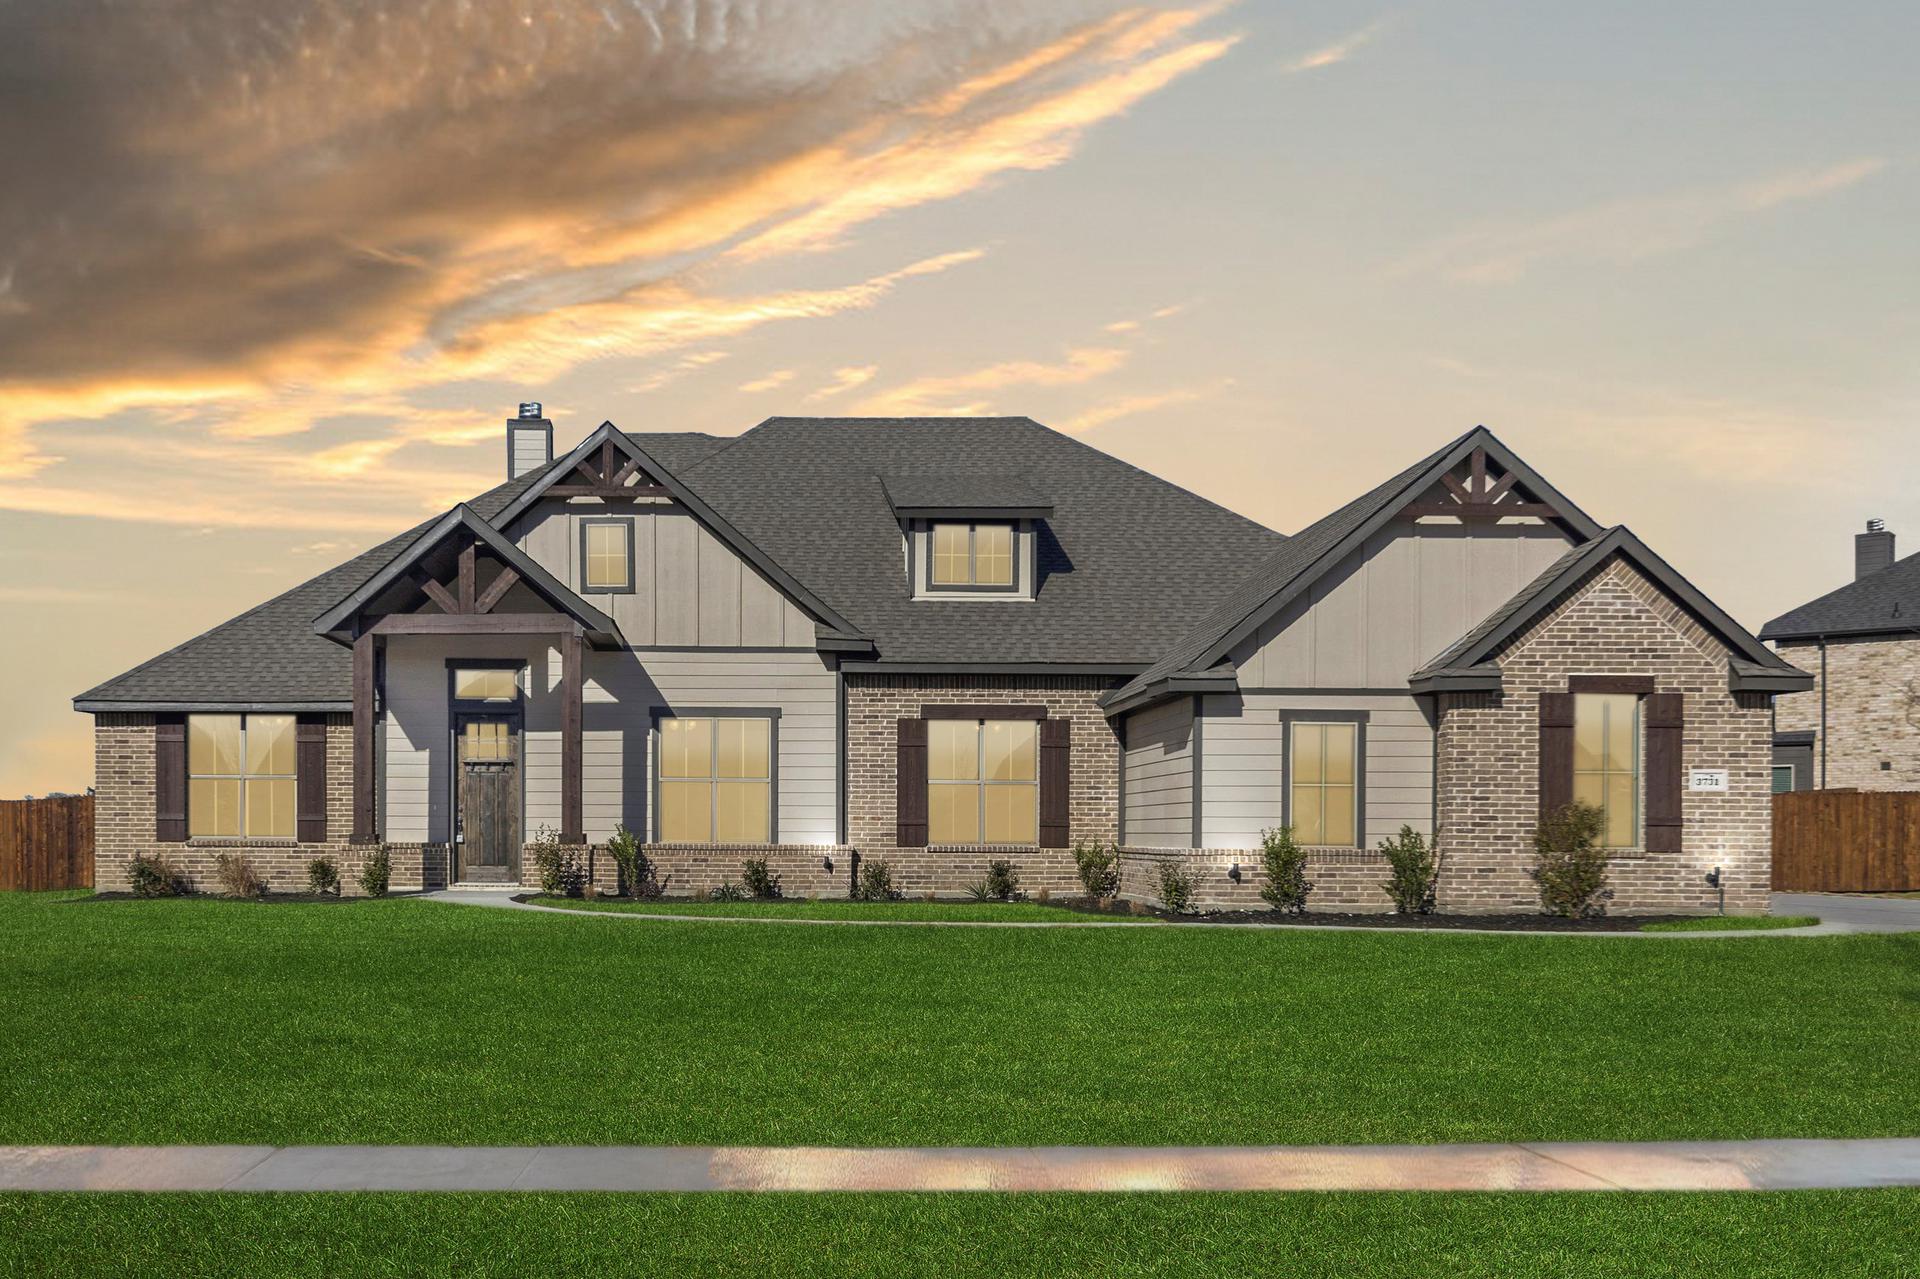 3141 C. Concept 3141 Home with 4 Bedrooms